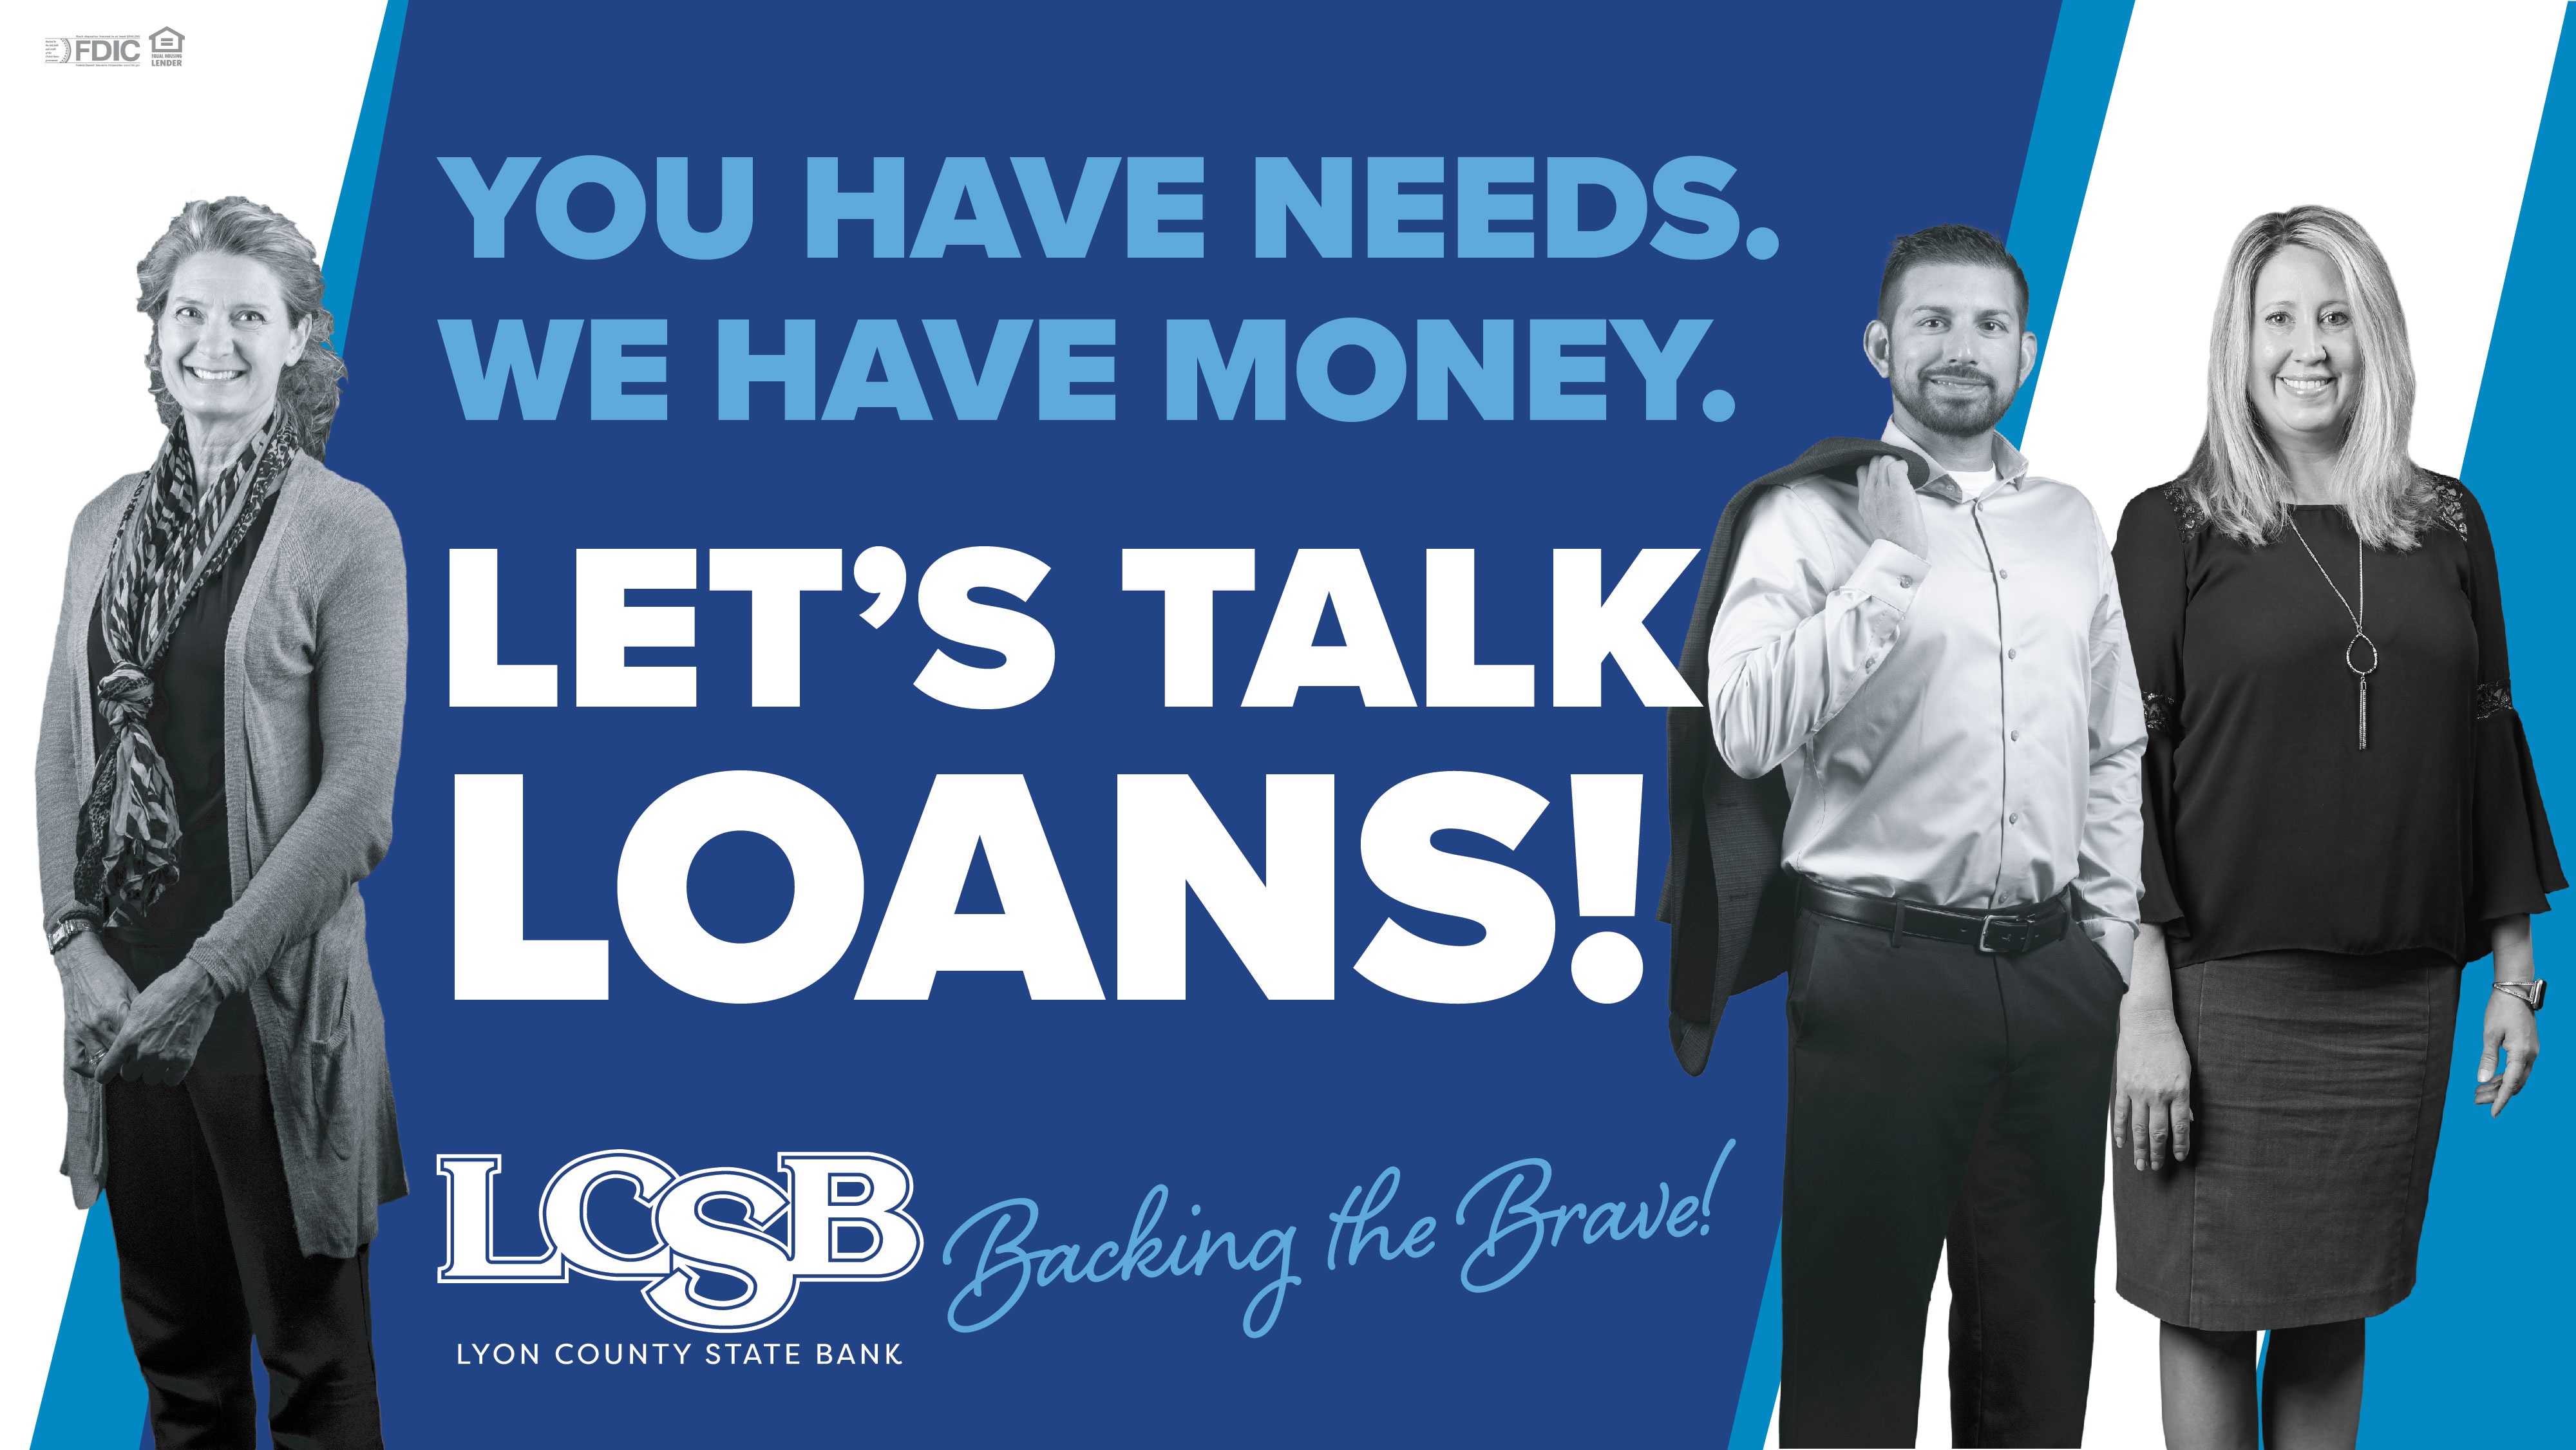 Let's talk loan ad.  You have needs, we have money.